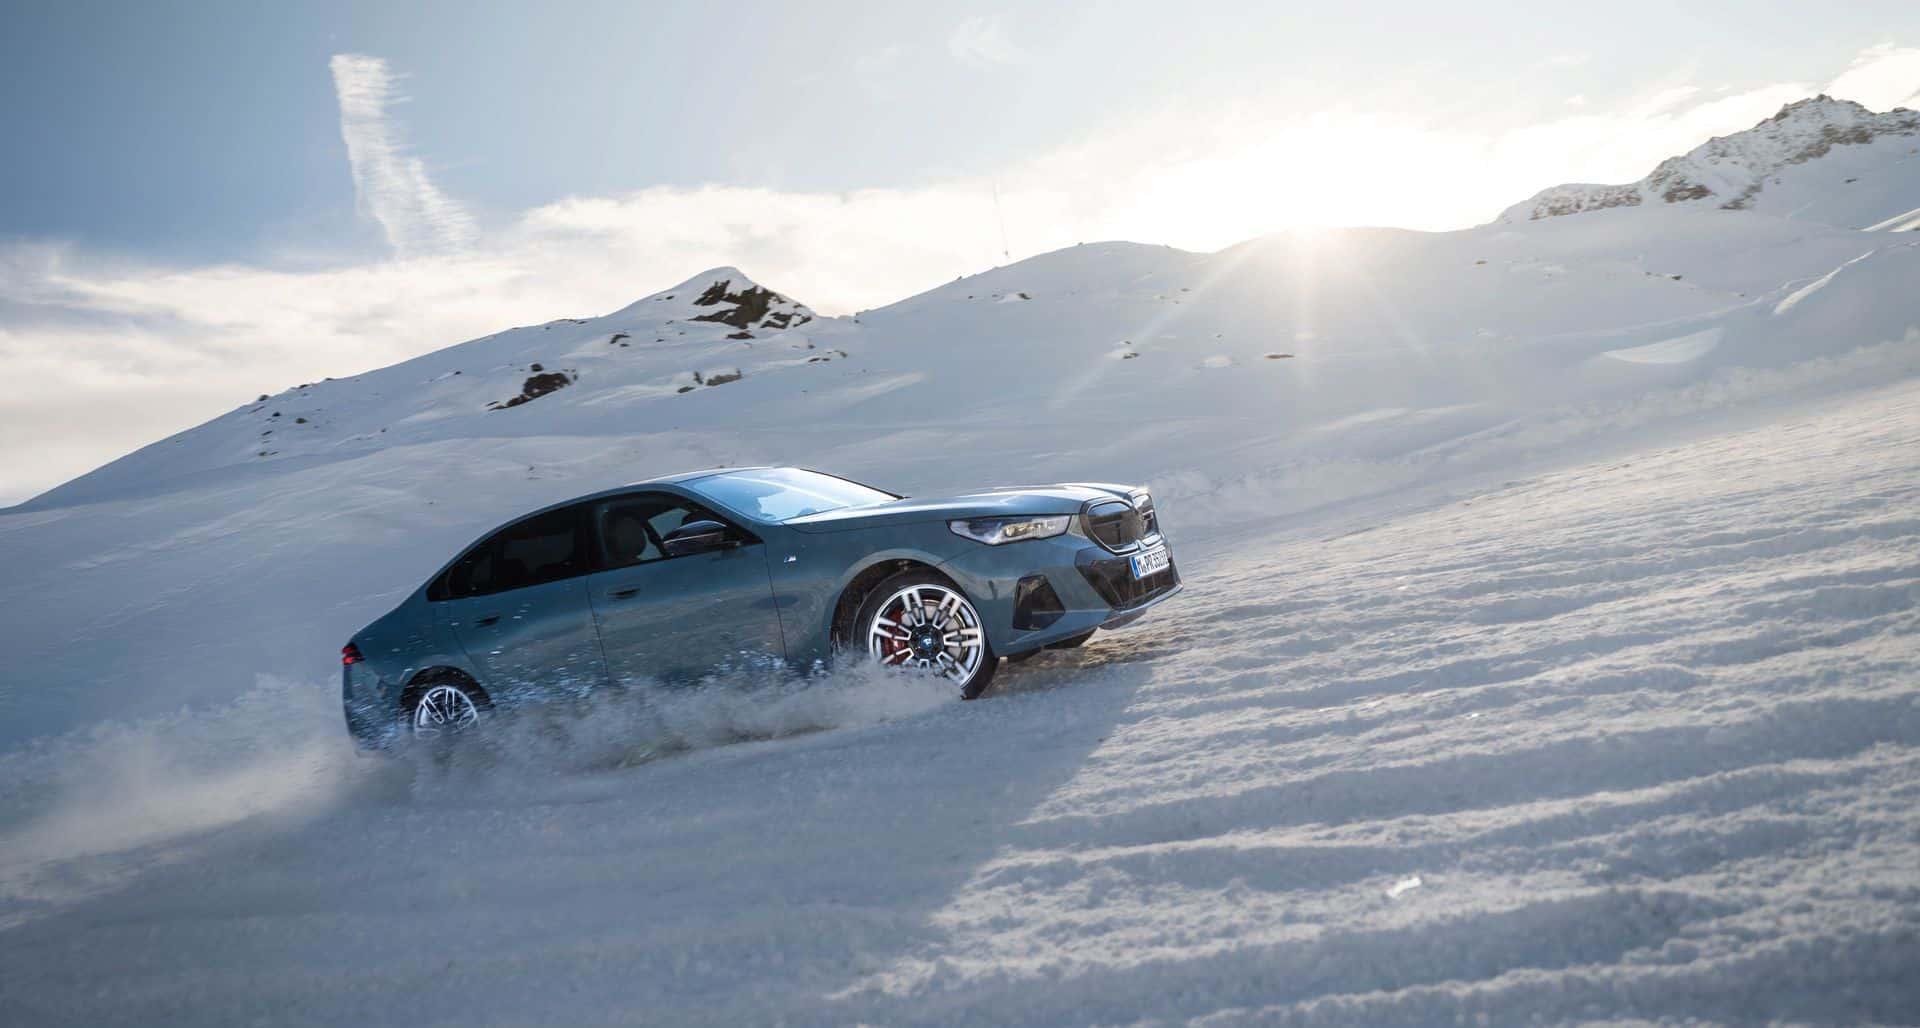 Bmw Shows How Much Fun You Can Have At Its M Snow Ice Experience